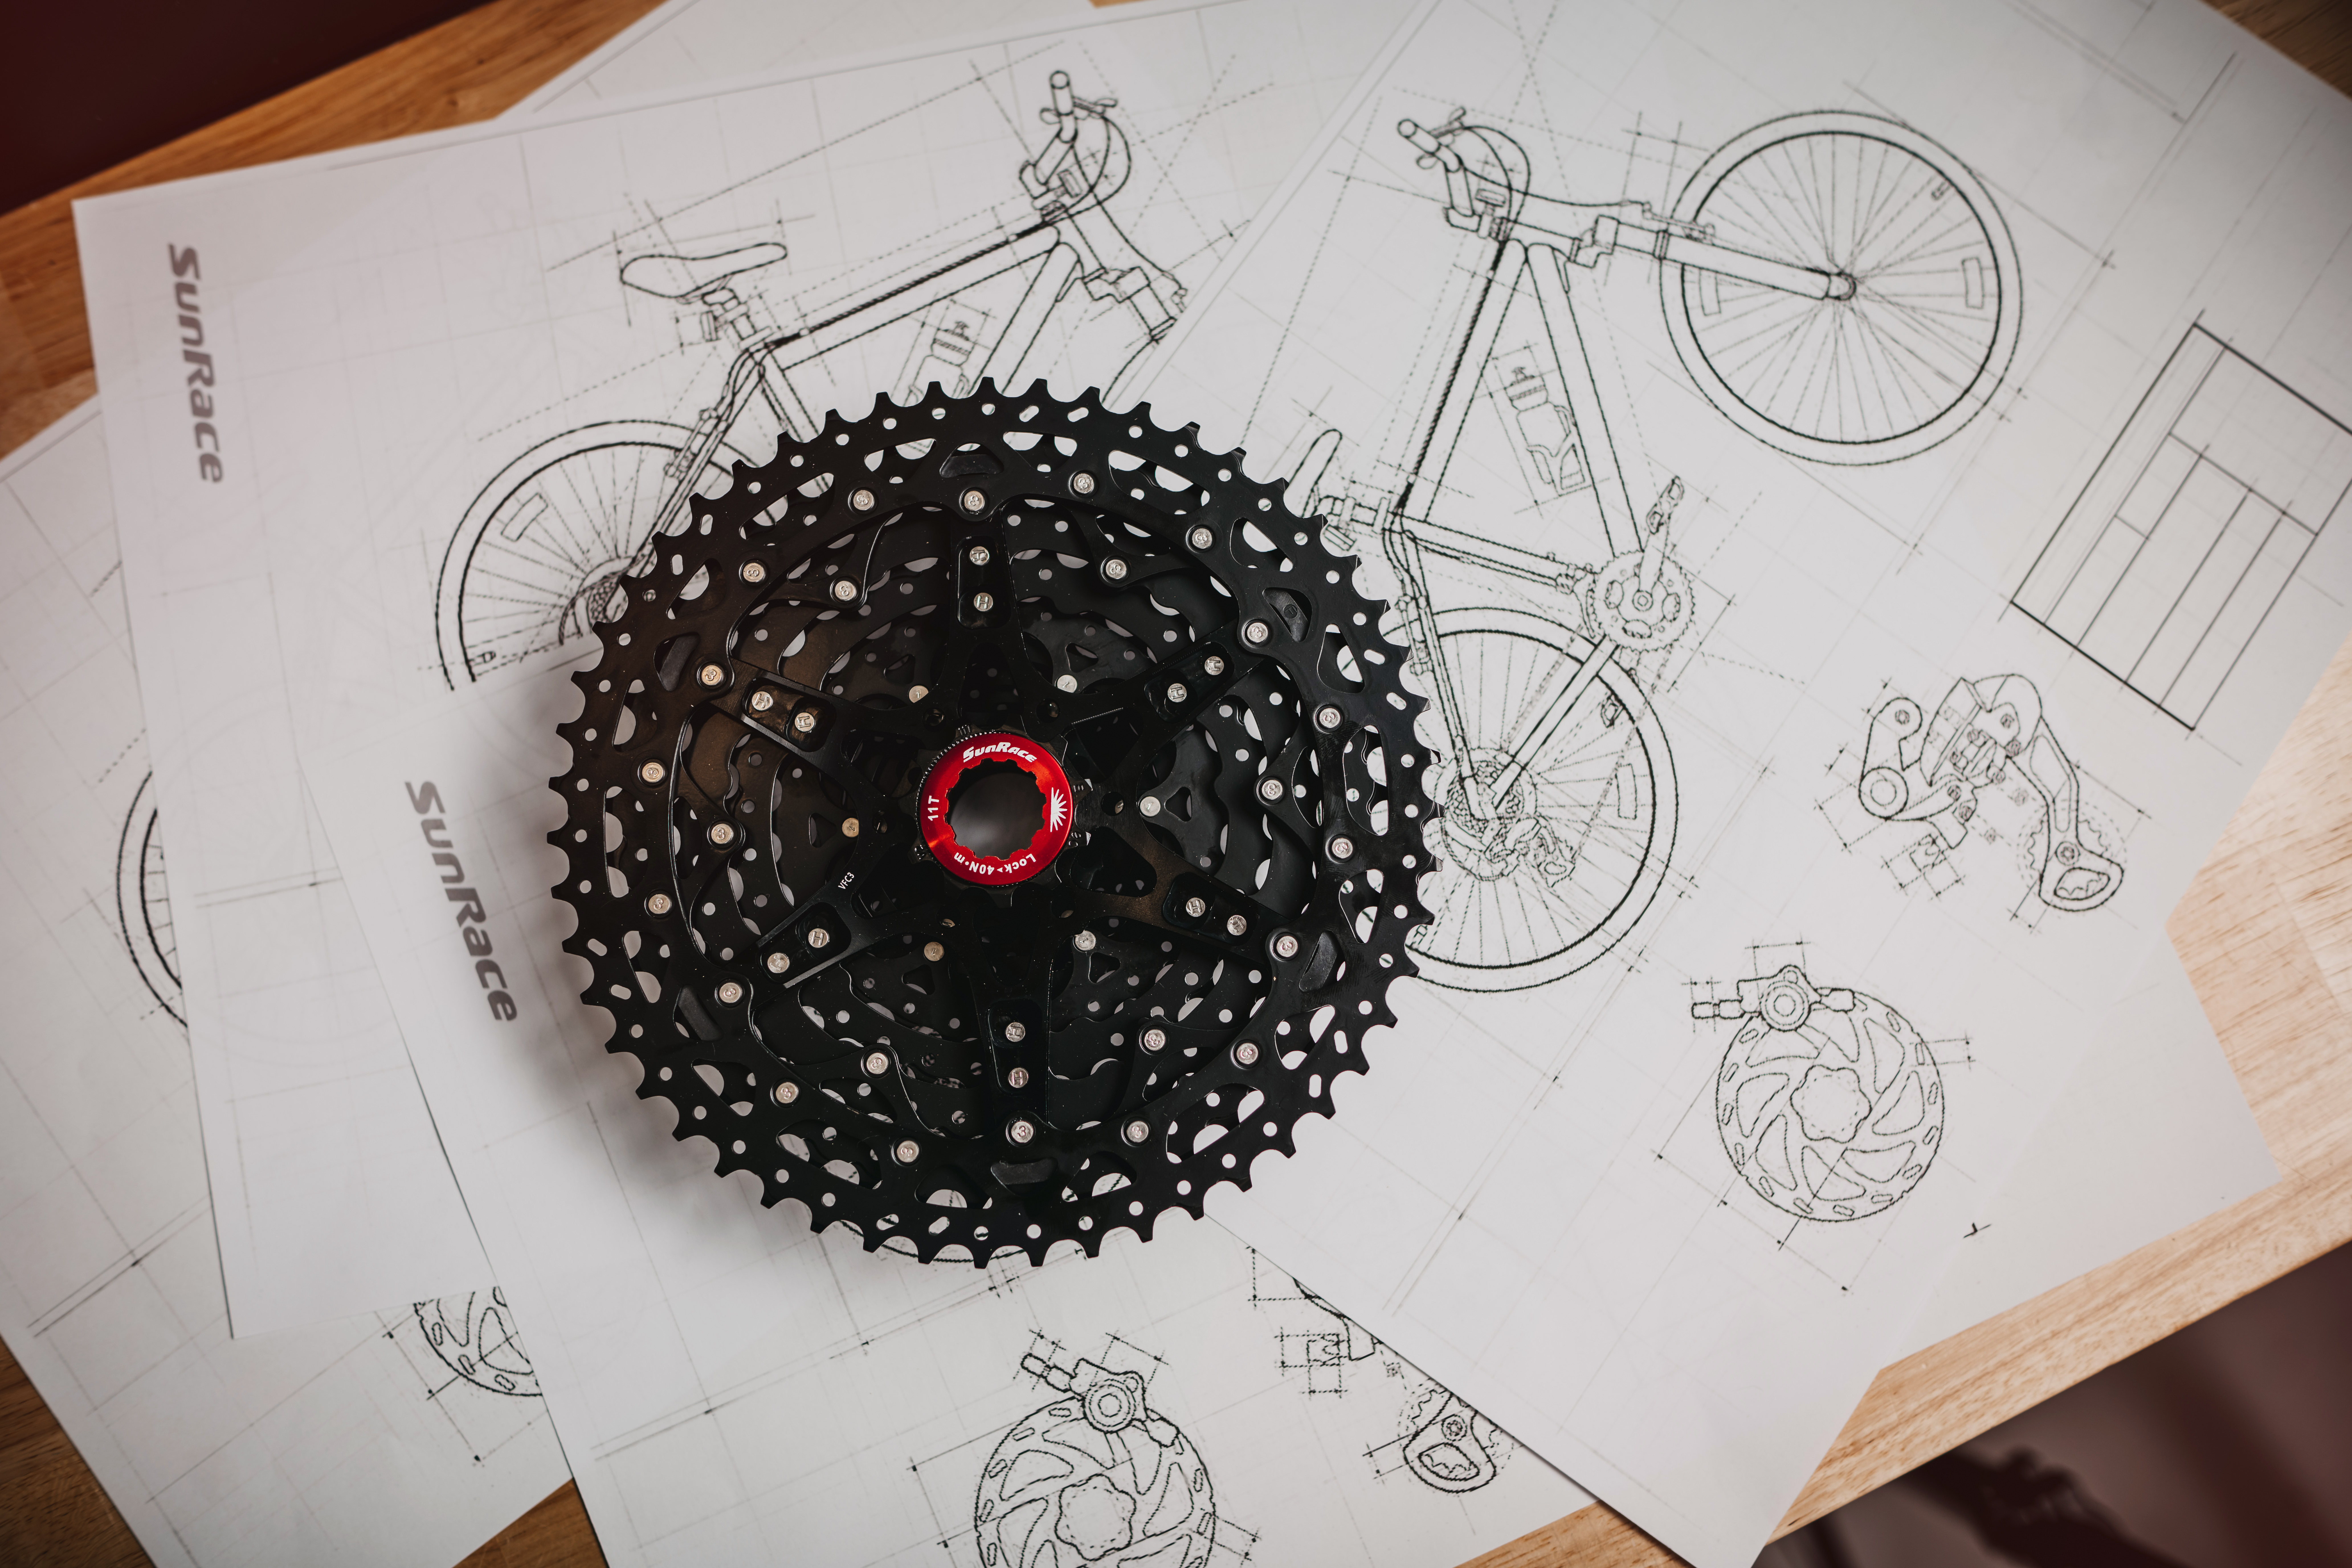 The difference between an 11-speed cassette and a 12-speed cassette